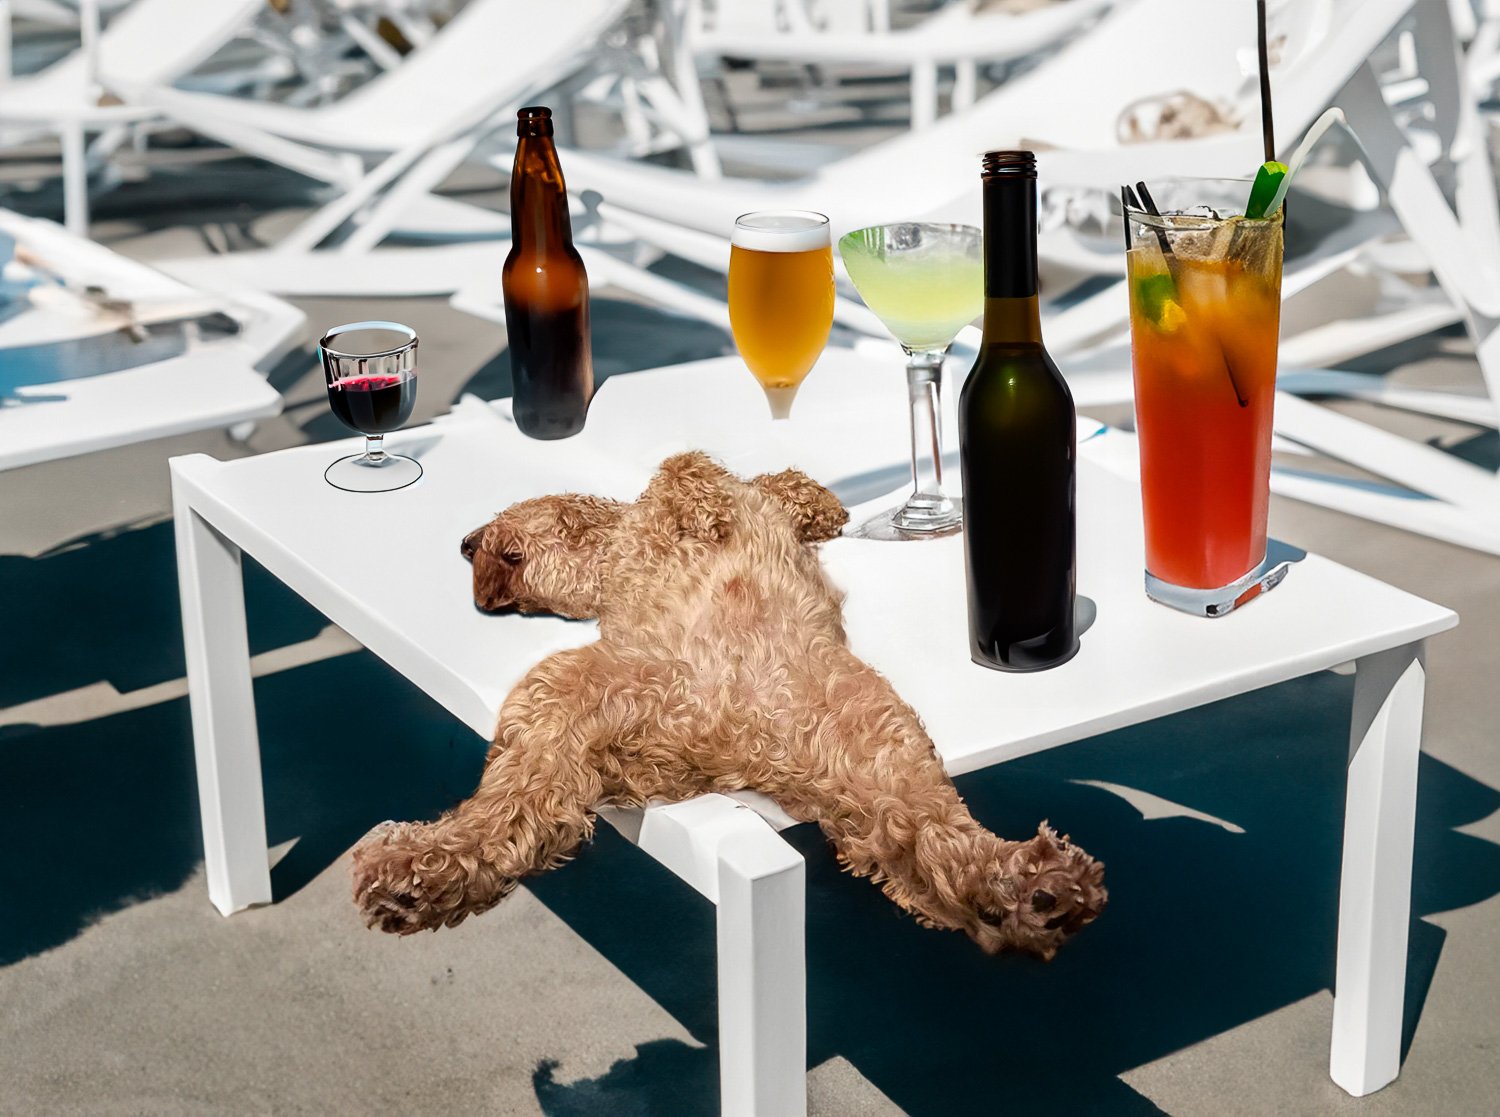 A ginger curly haired dog lying on its back on a white table surrounded by alcoholic drinks